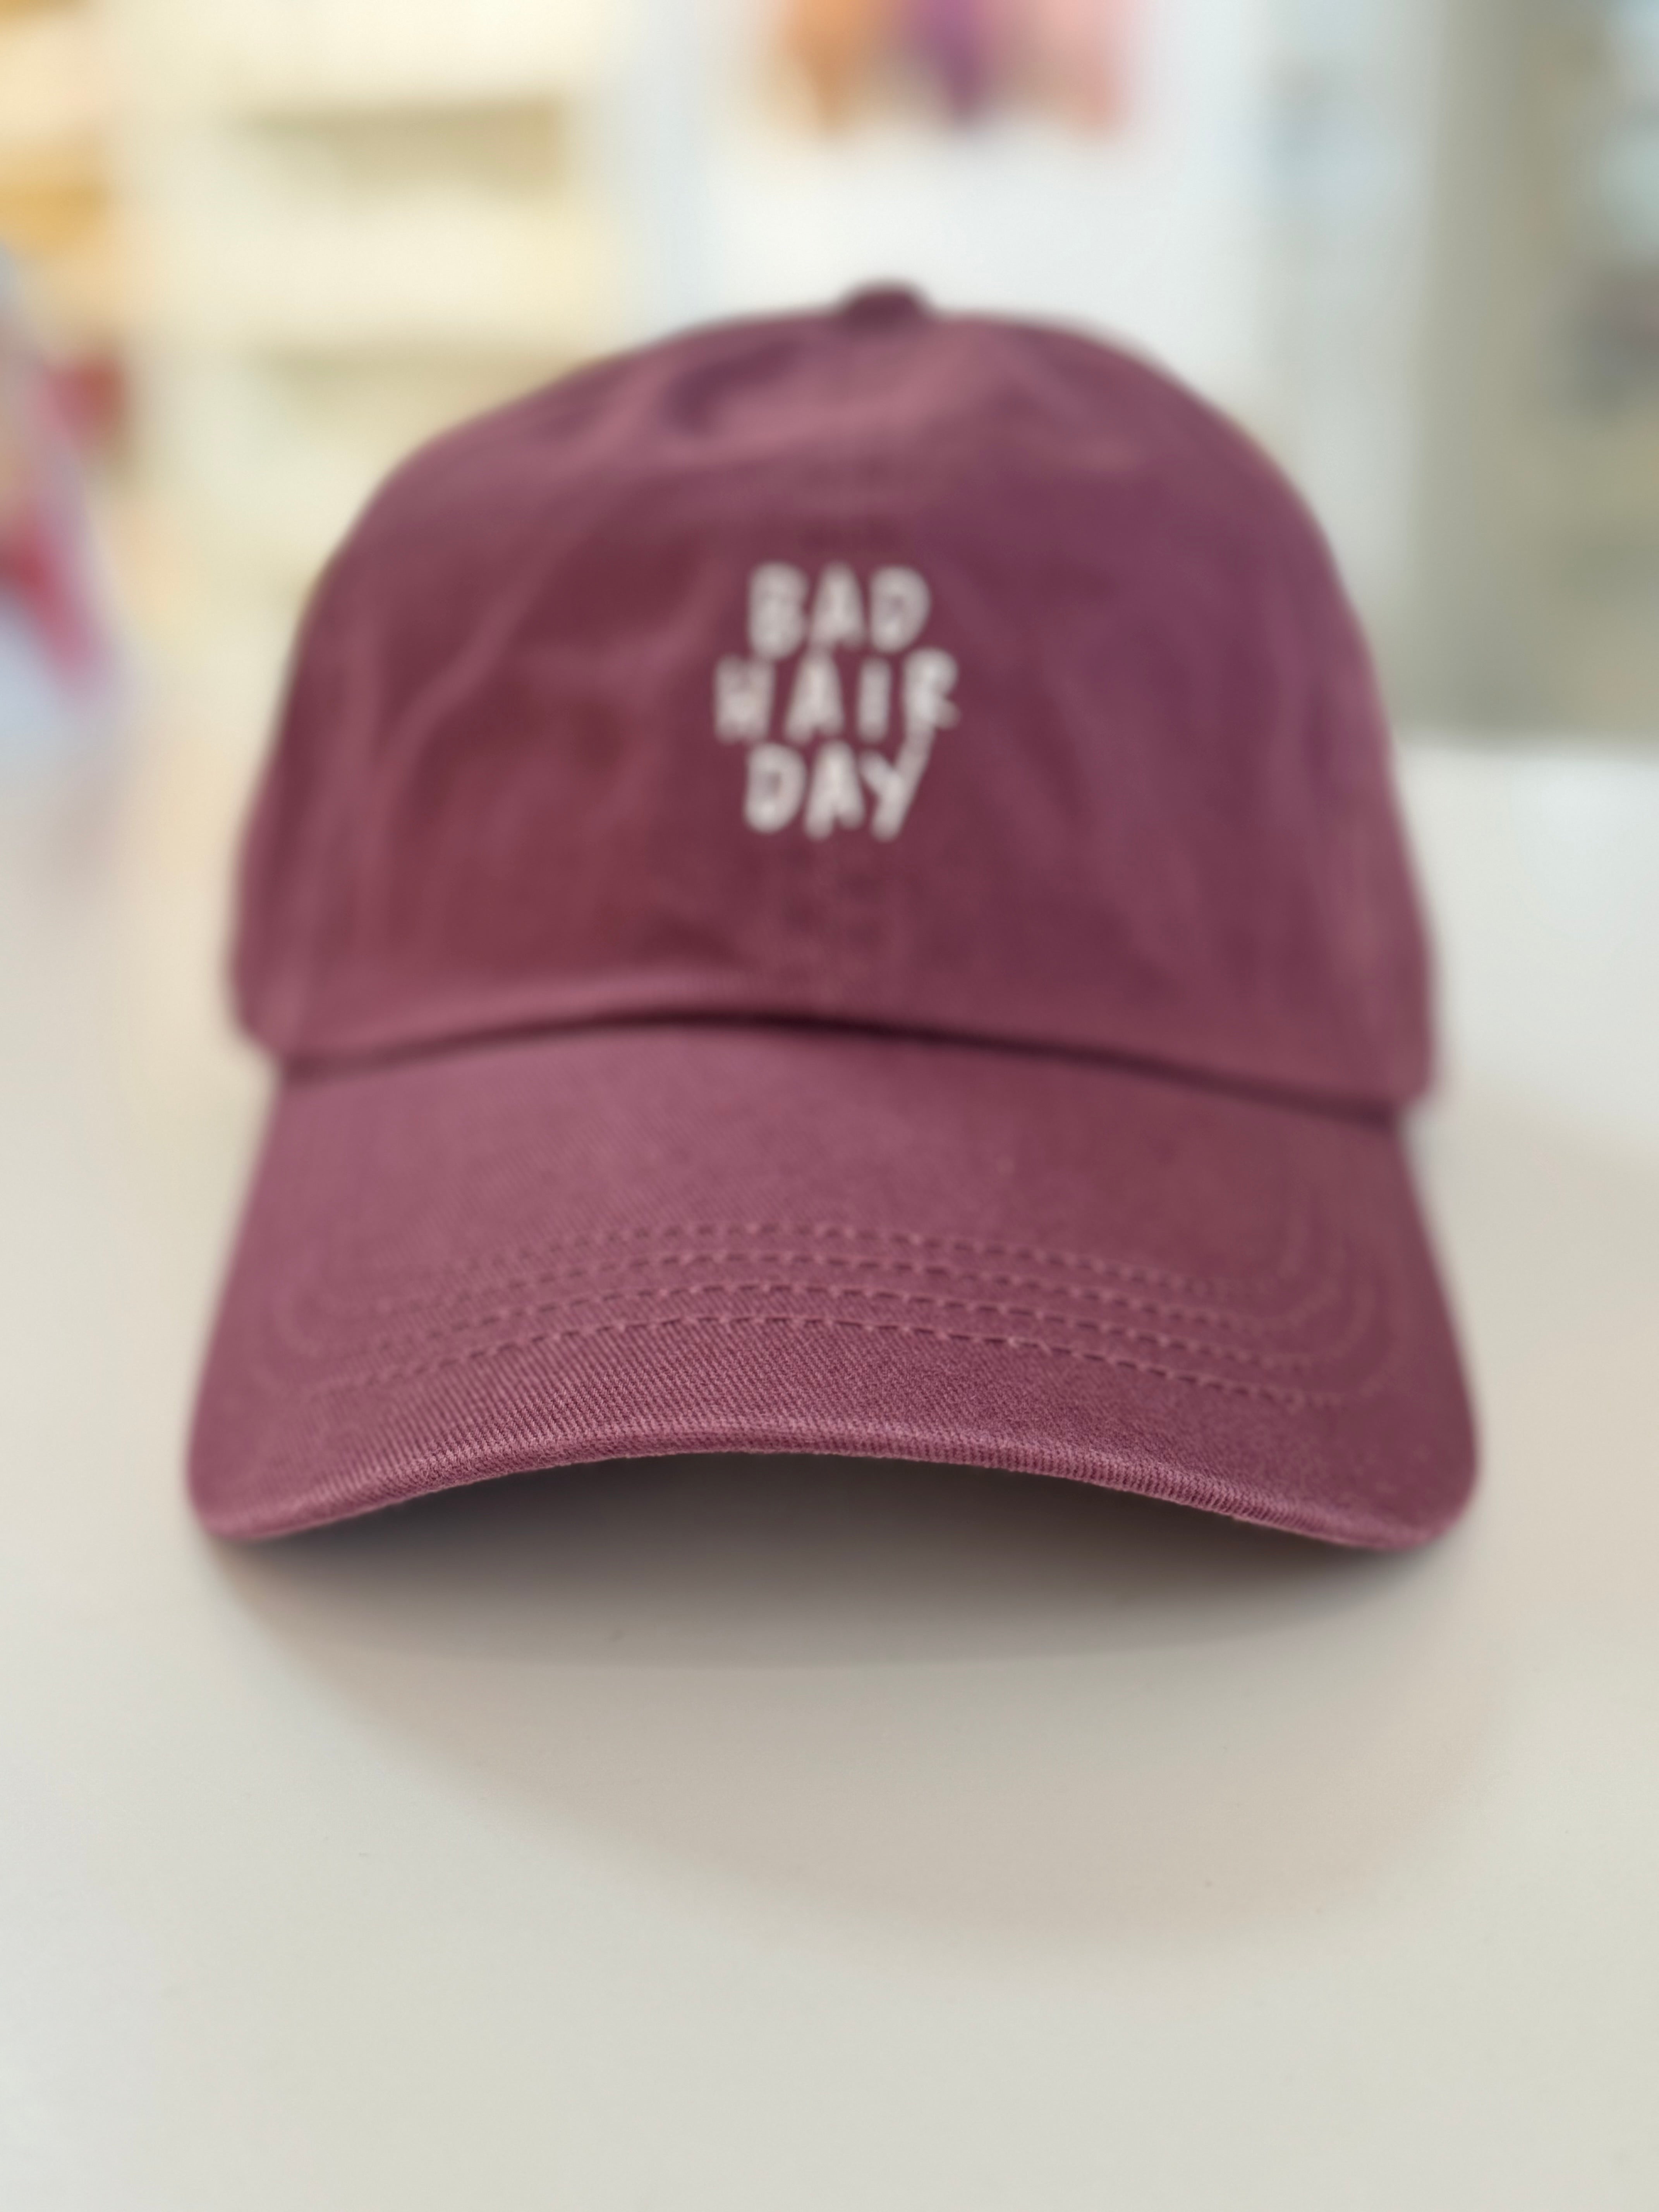 Casquette « Bad hair day »